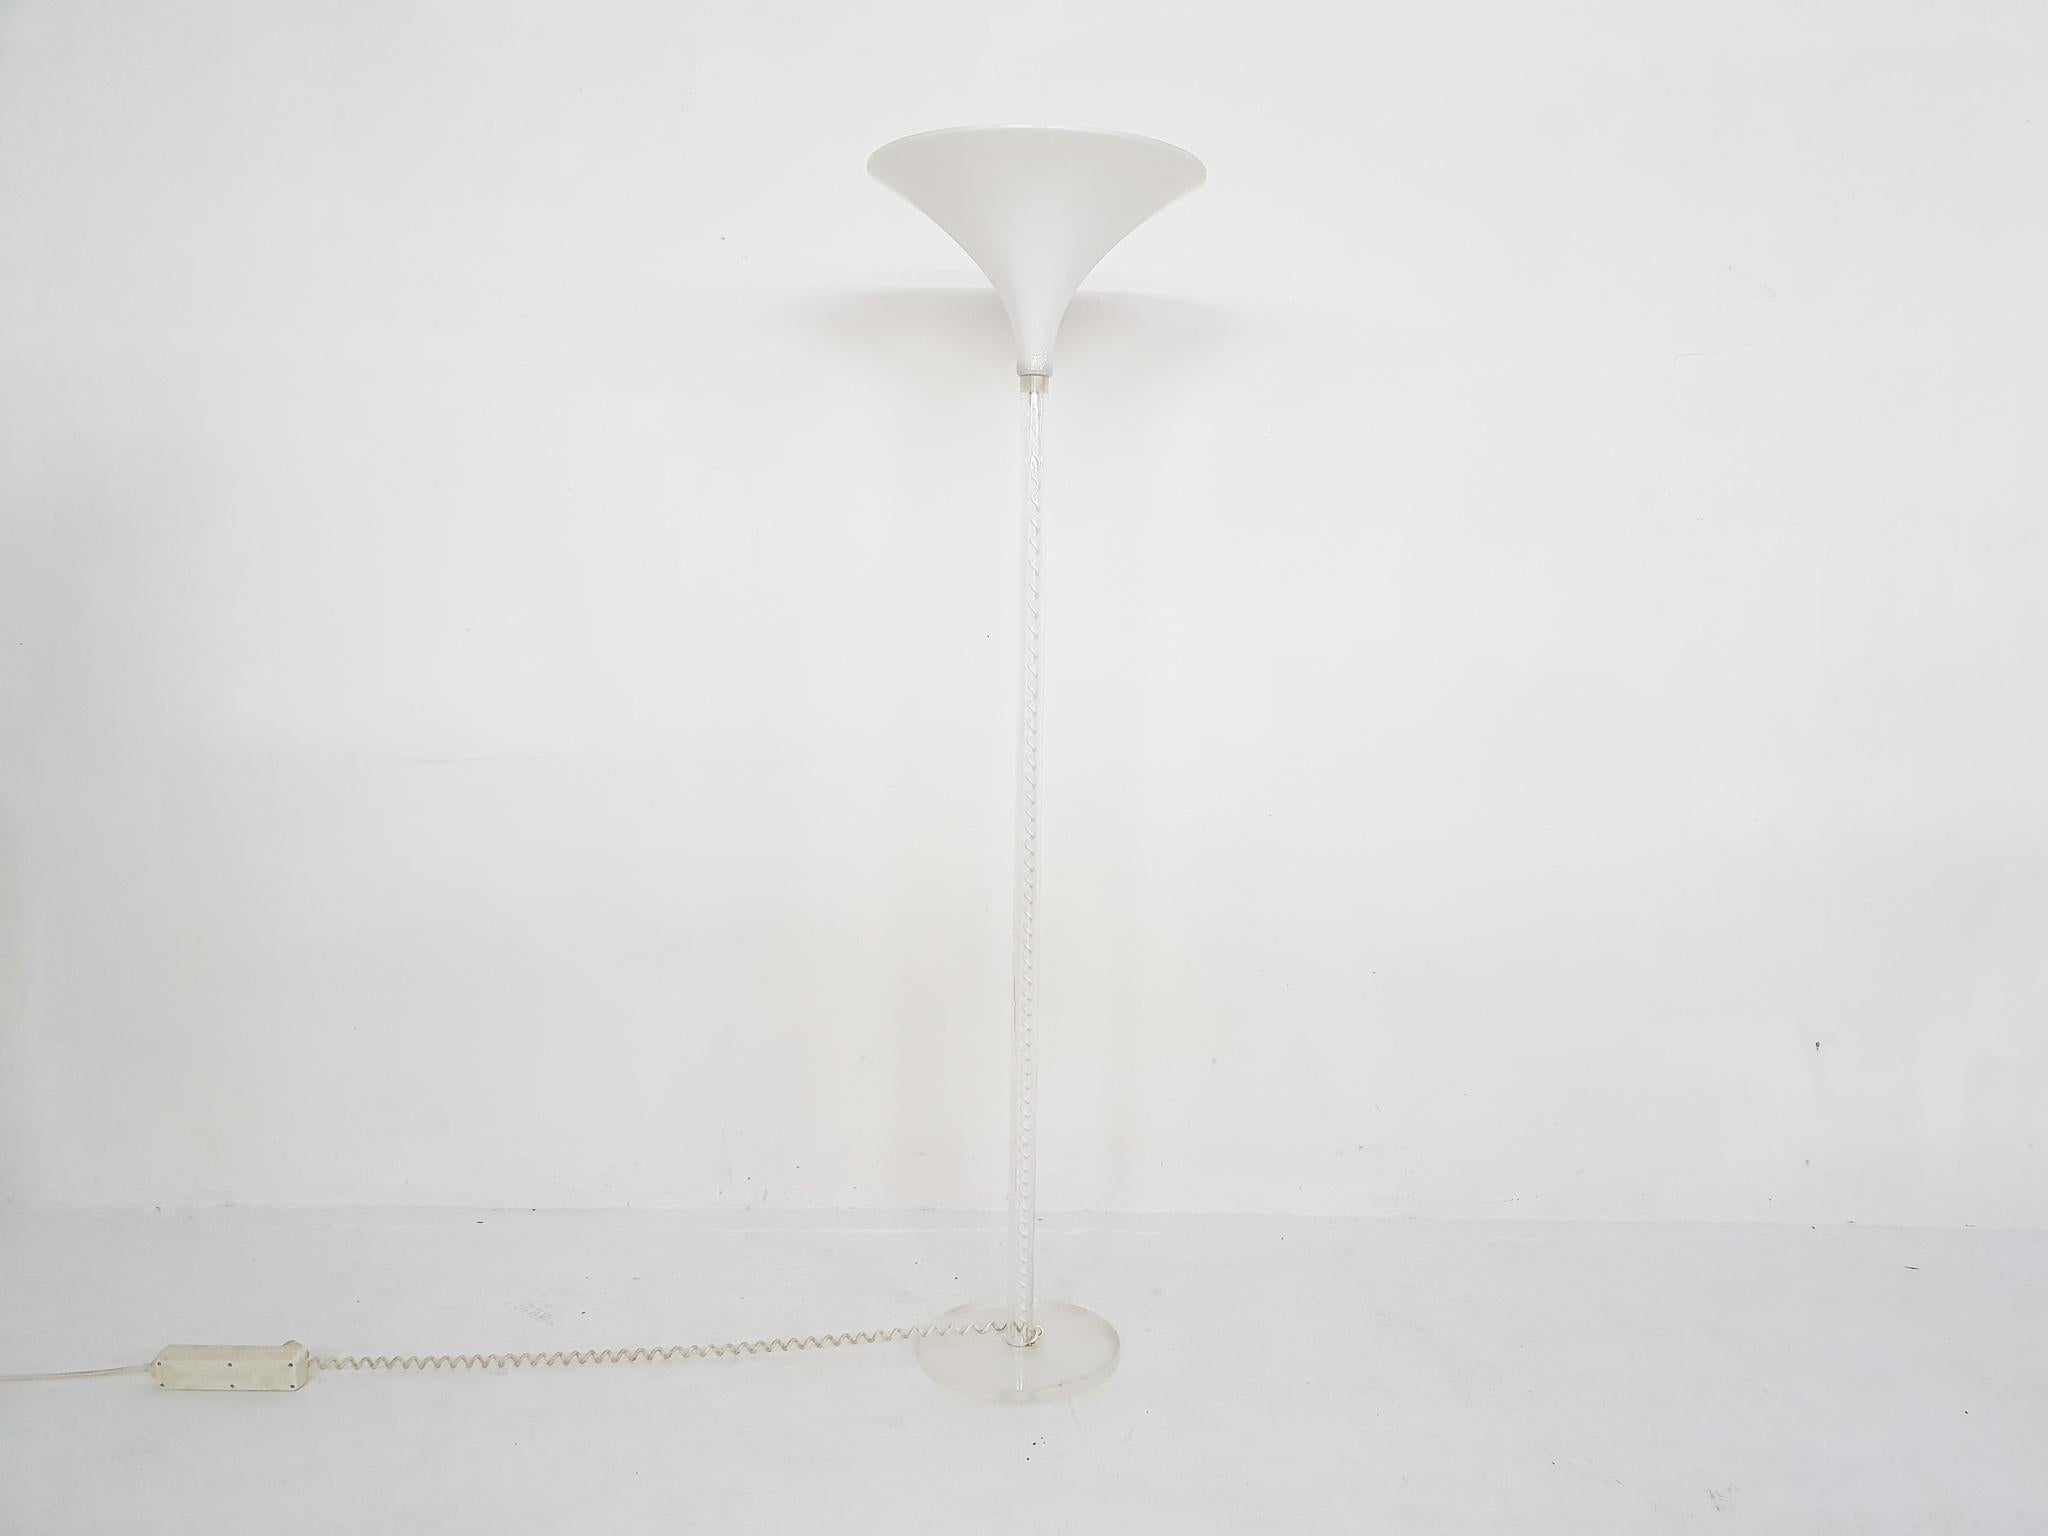 Plastic floor light with curled wire inside the lucite tube. The lamp does not have a switch, but we can add one if prefered.